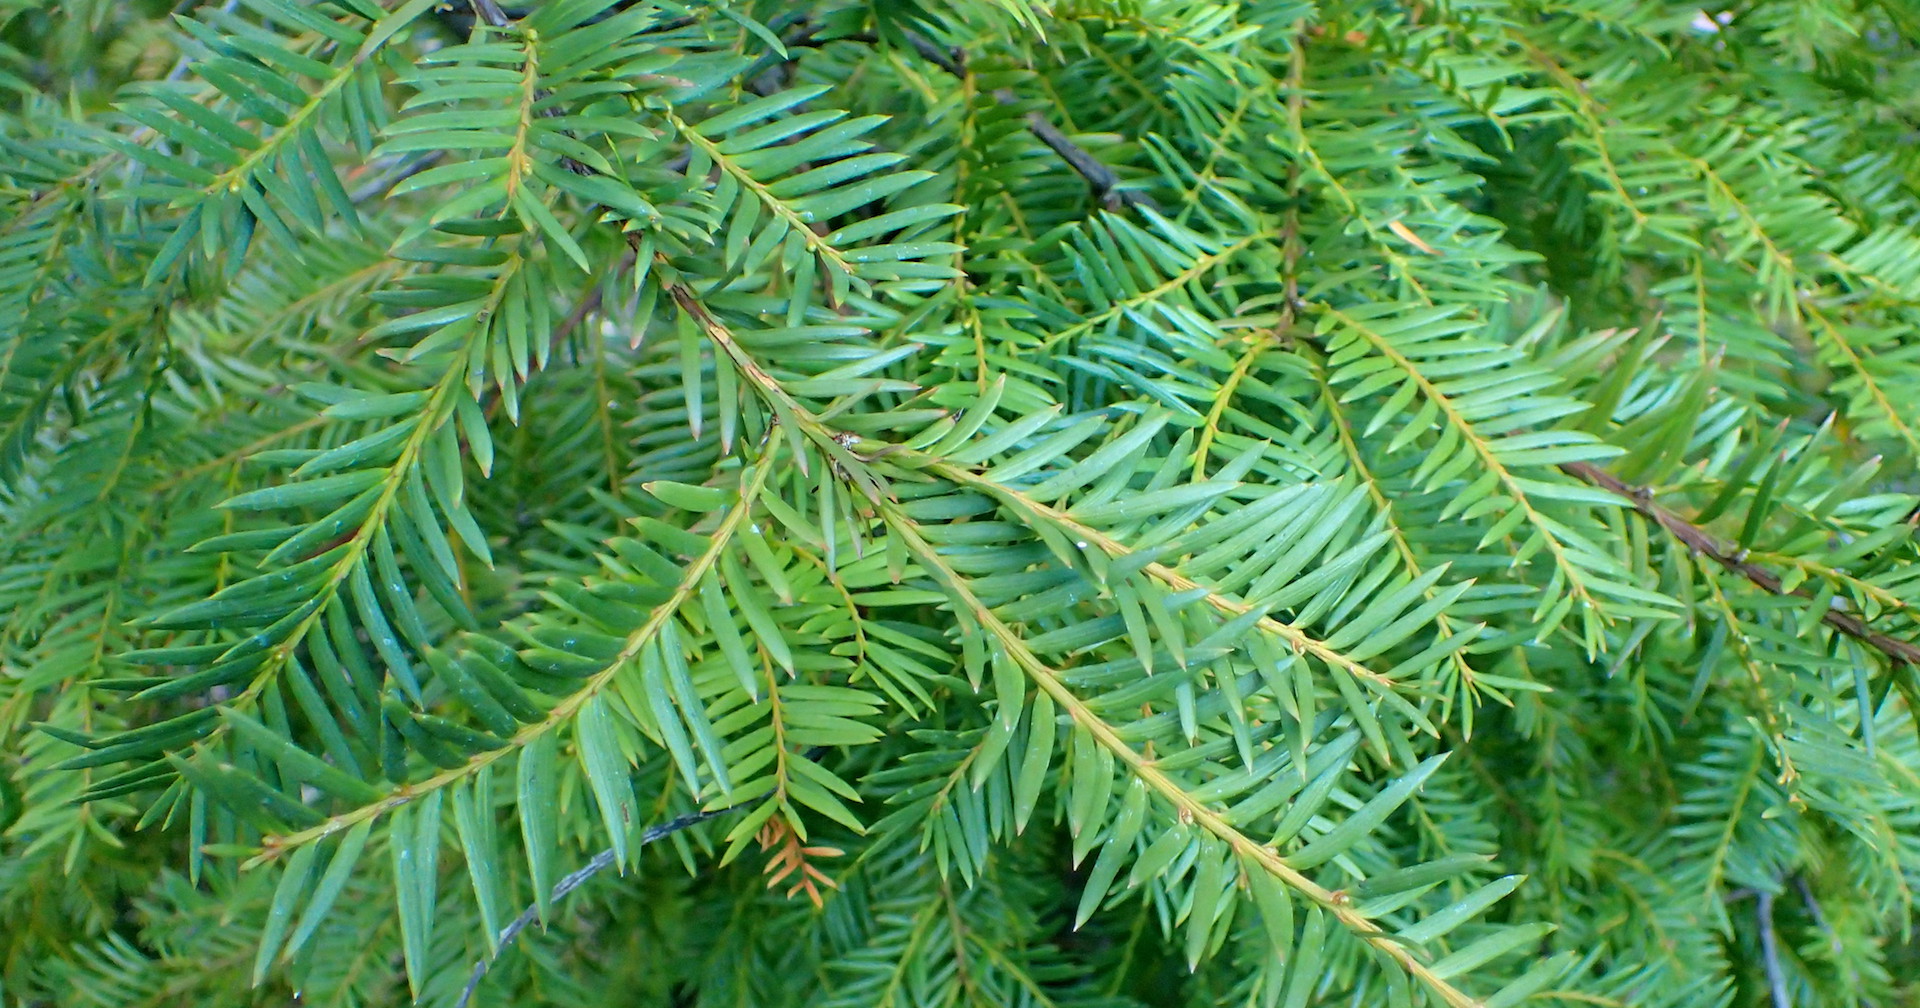 Branches of the Himalayan Yew tree without its fruits